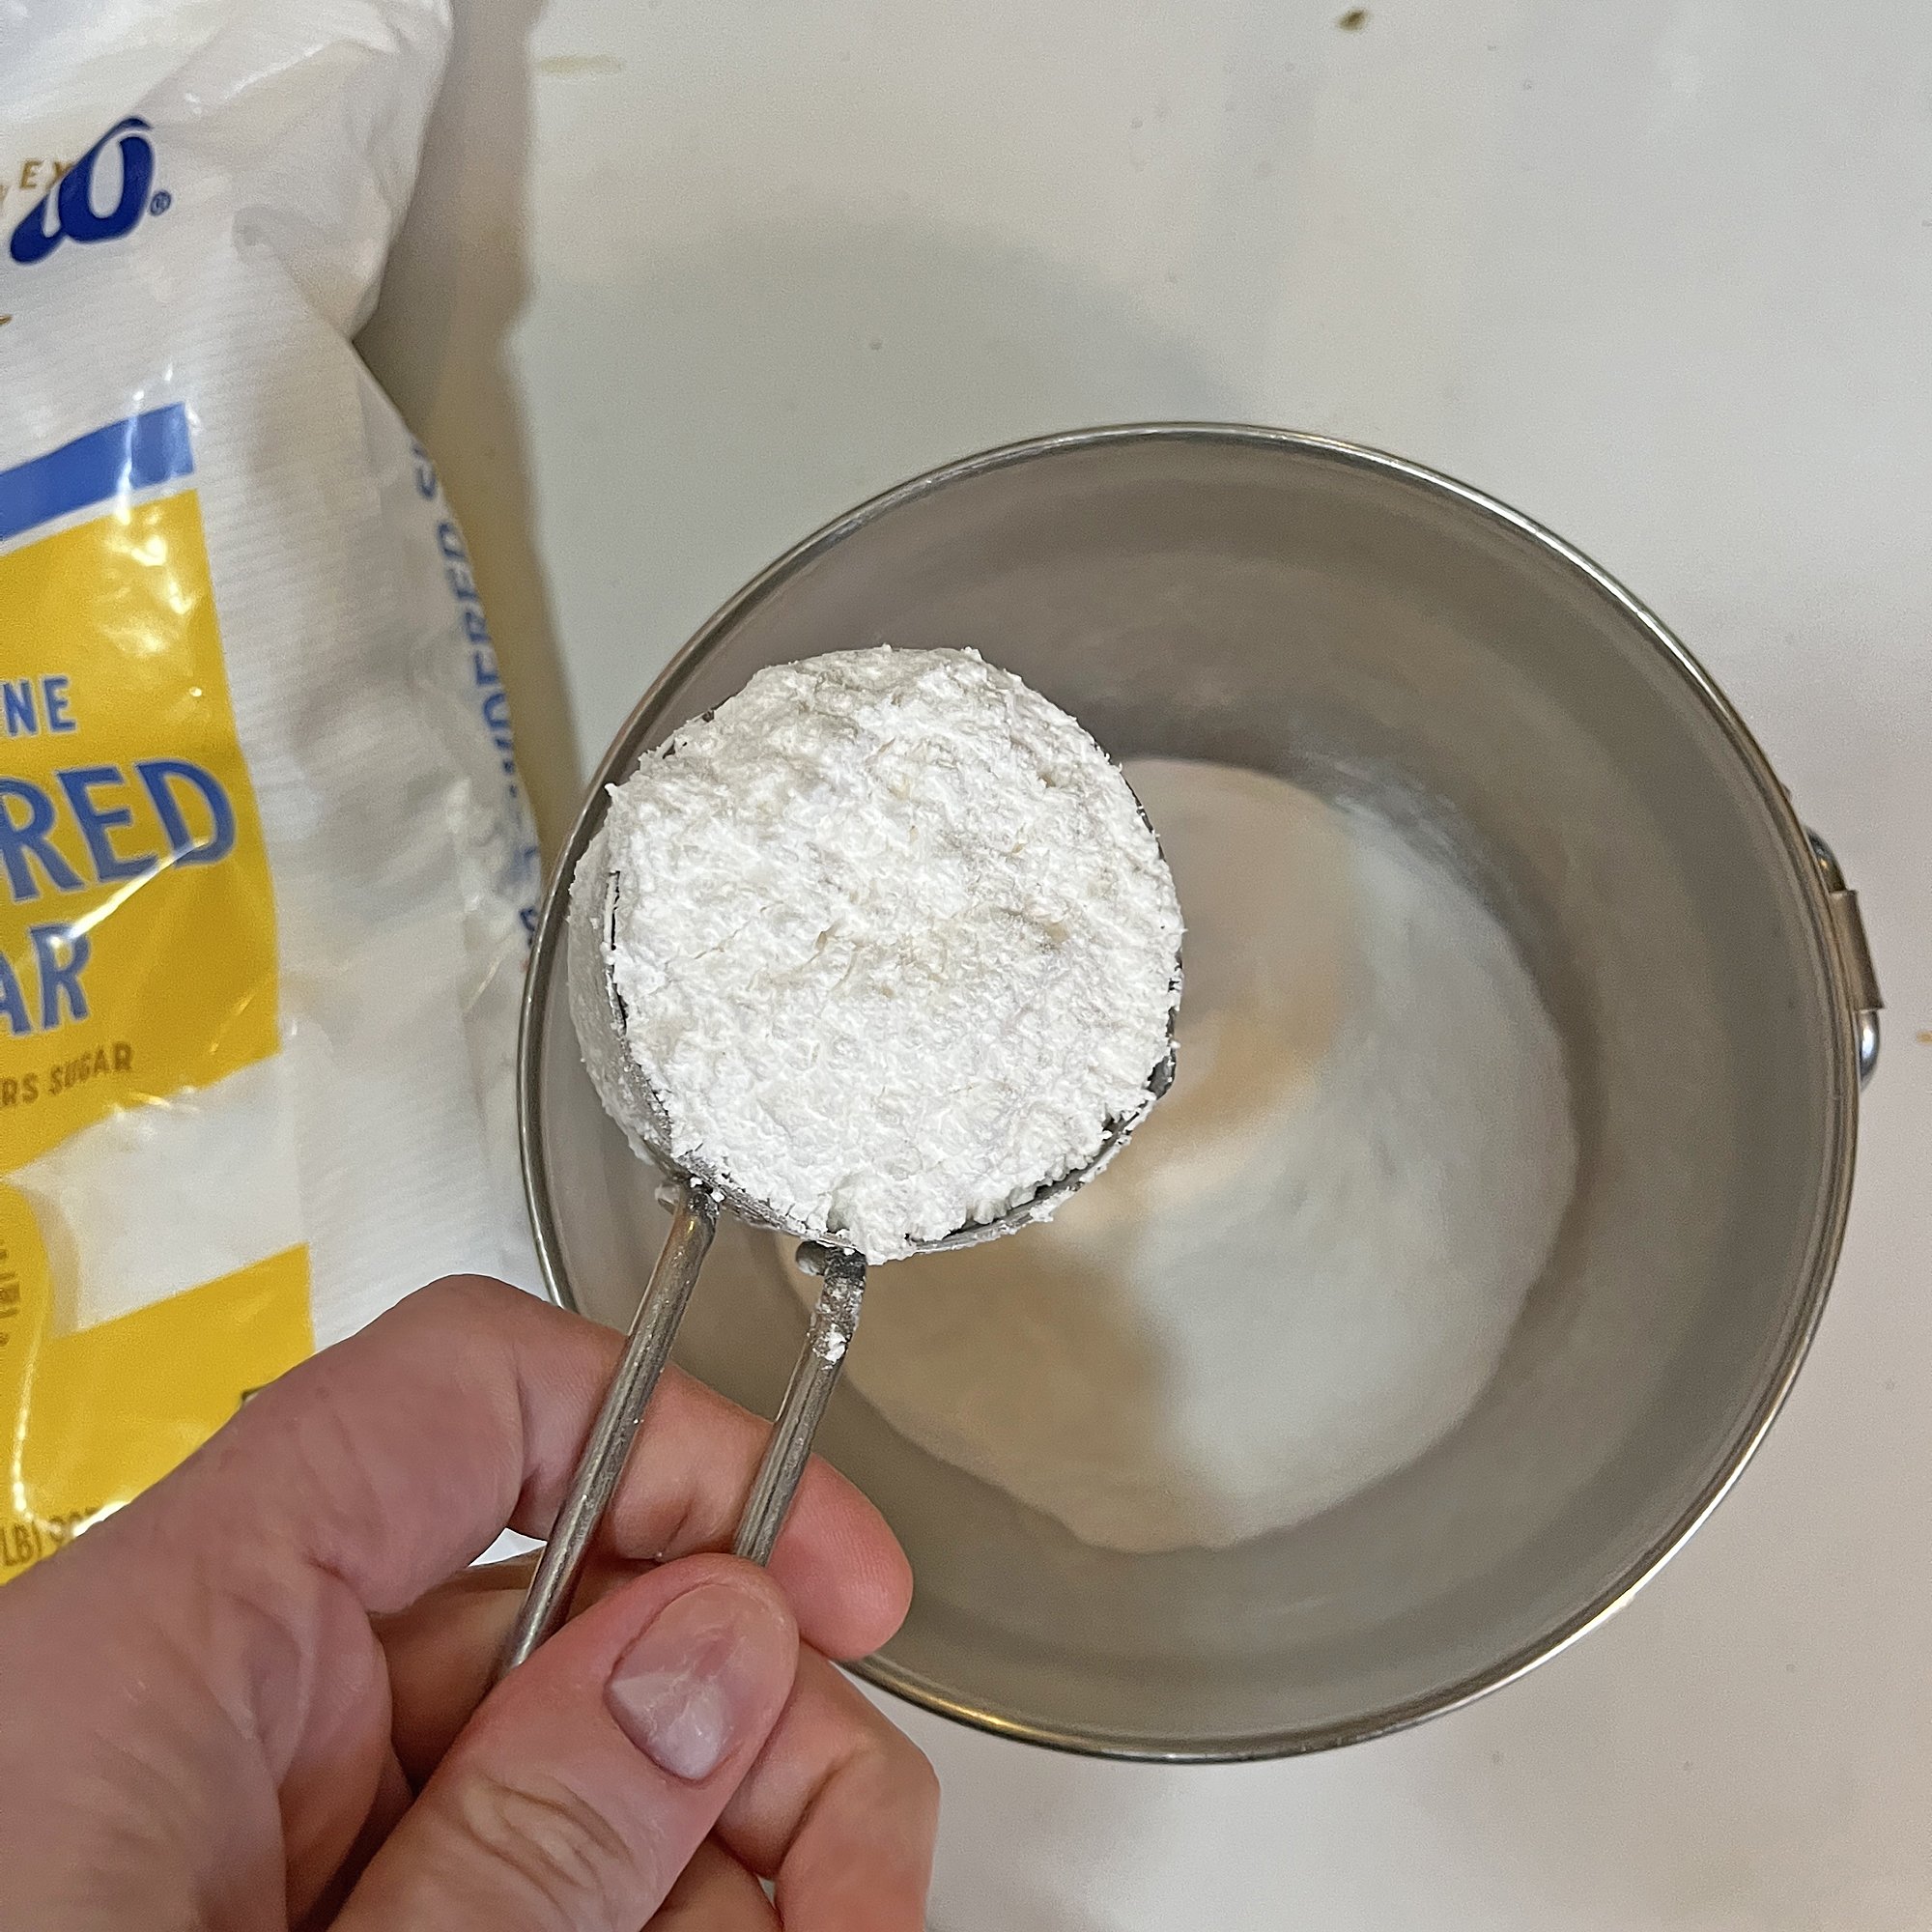 Measure out equal parts baking soda &amp; powdered sugar. I used 1/4 cup each.